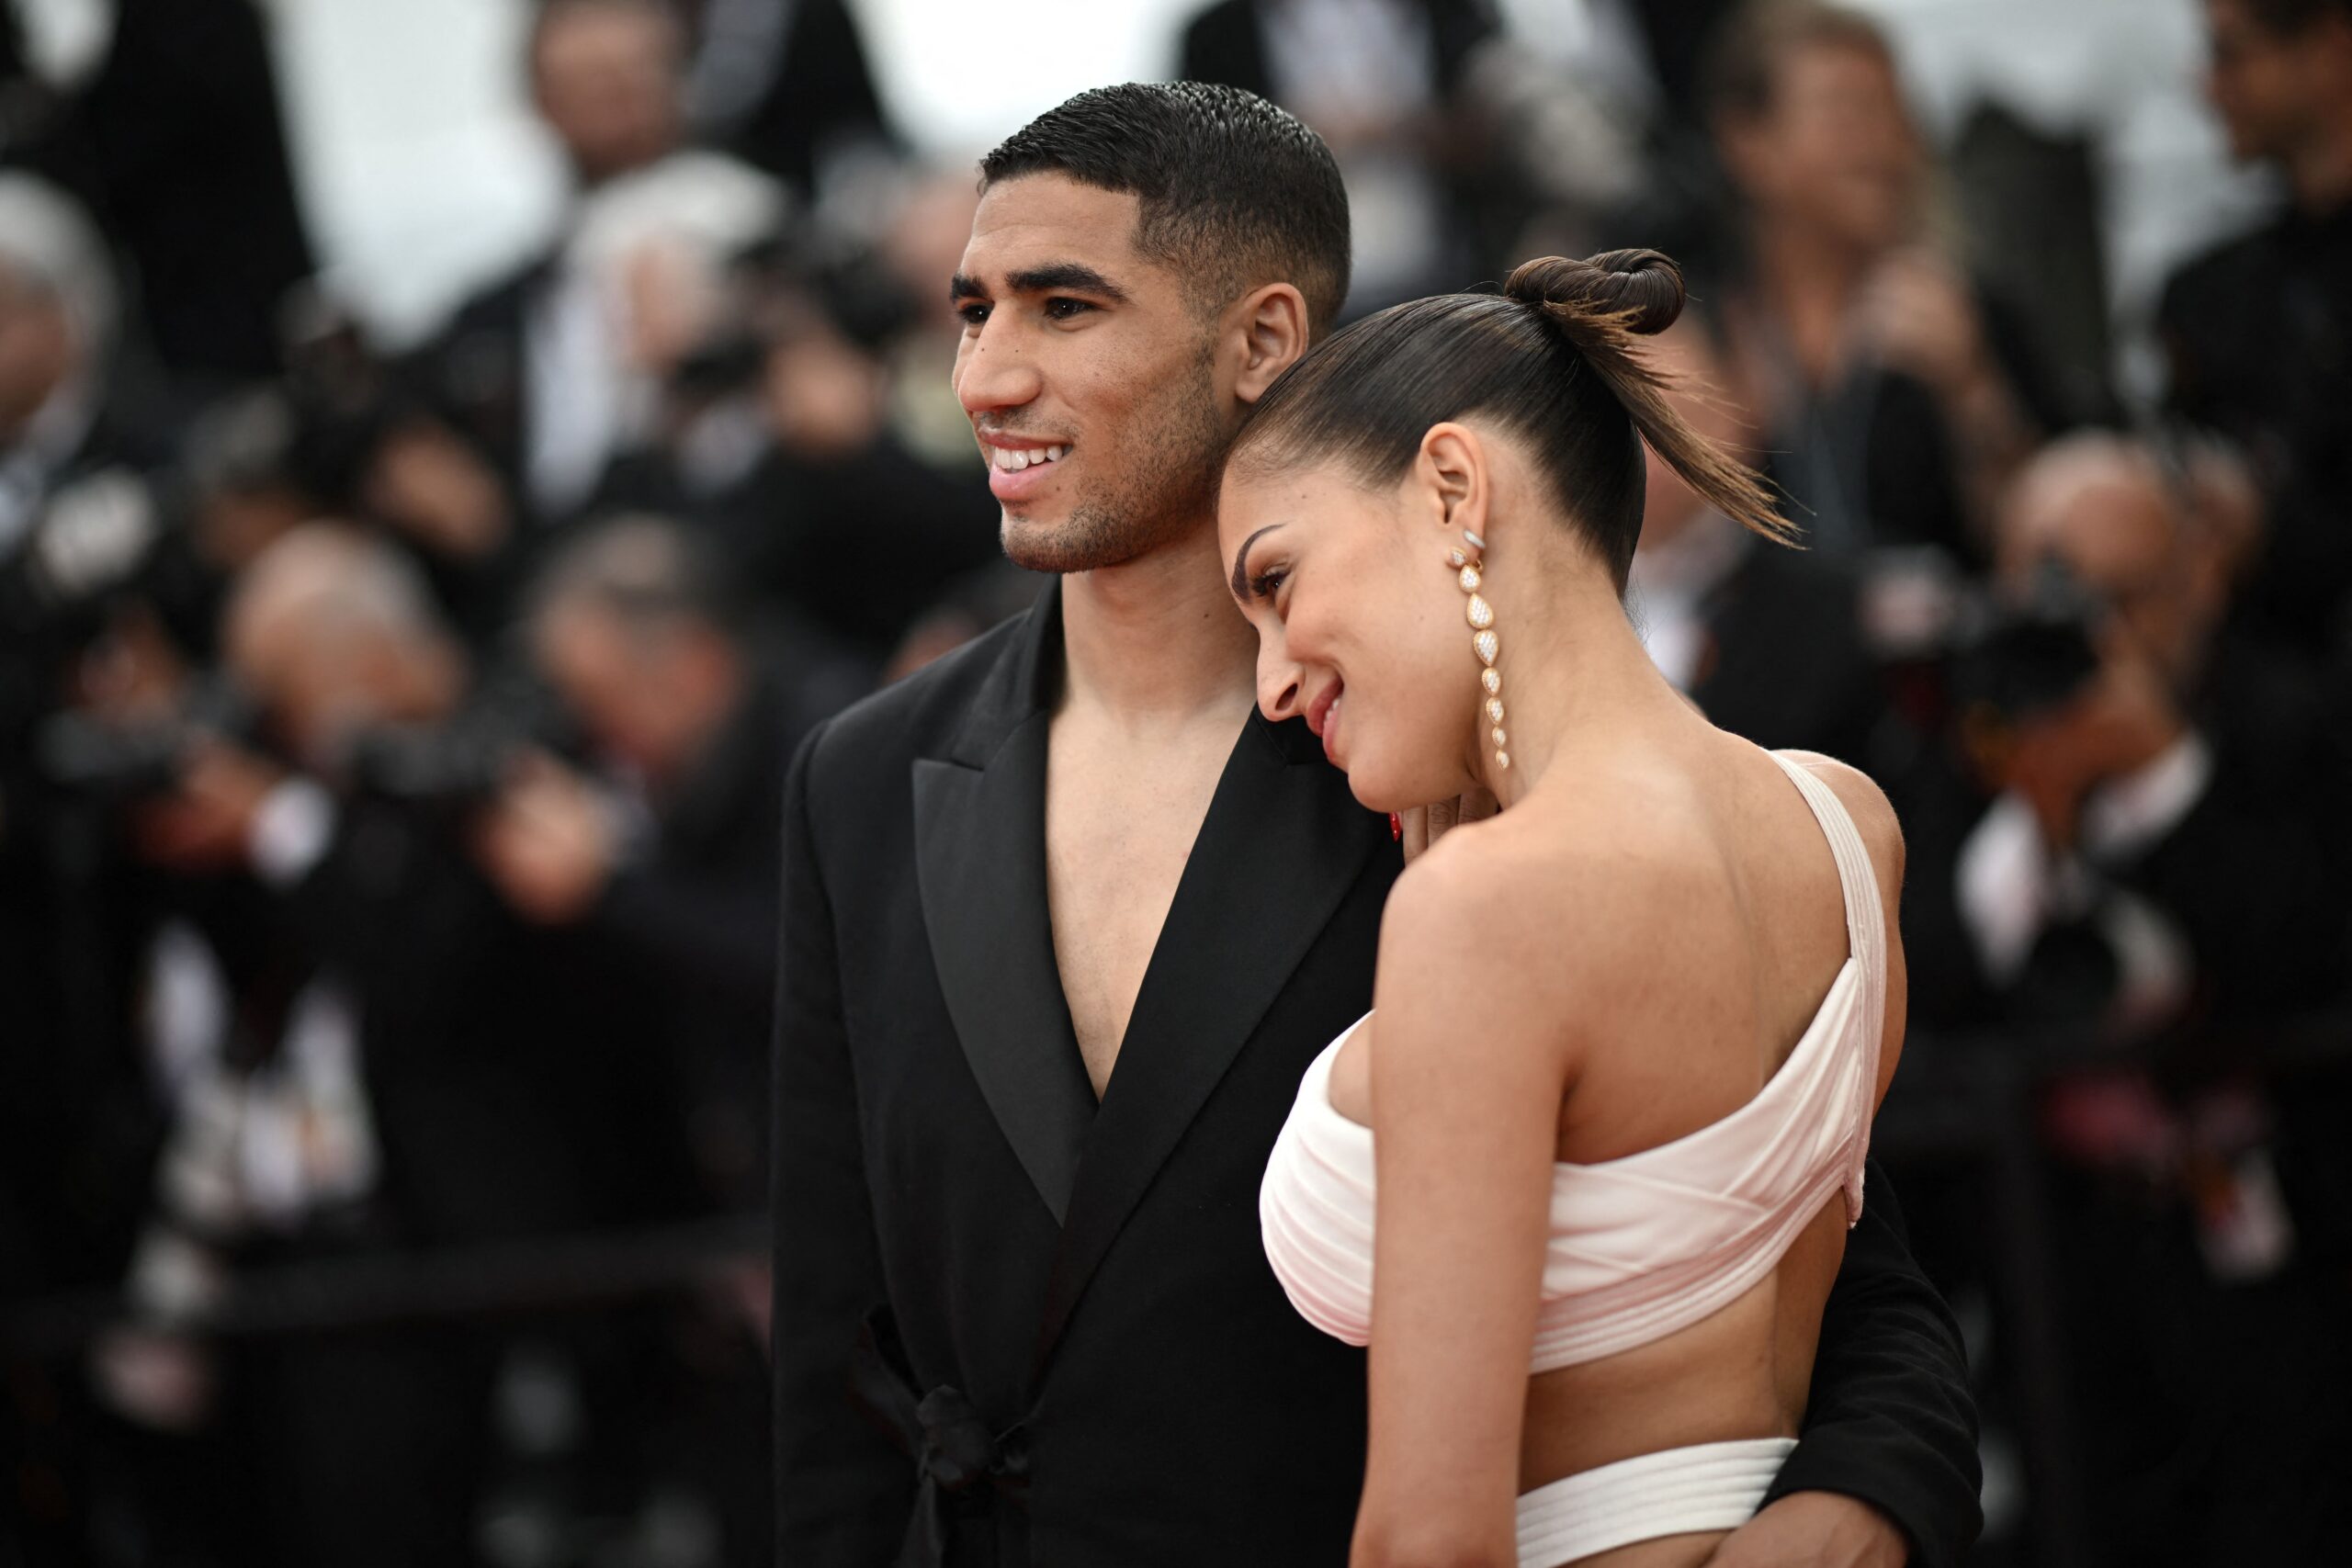 Moroccan defender Achraf Hakimi (L) and his wife Hiba Abouk arrive for the screening of the film "The Innocent (L'Innocent)" during the 75th edition of the Cannes Film Festival in Cannes, southern France, on May 24, 2022. (Photo by LOIC VENANCE / AFP) (Photo by LOIC VENANCE/AFP via Getty Images)